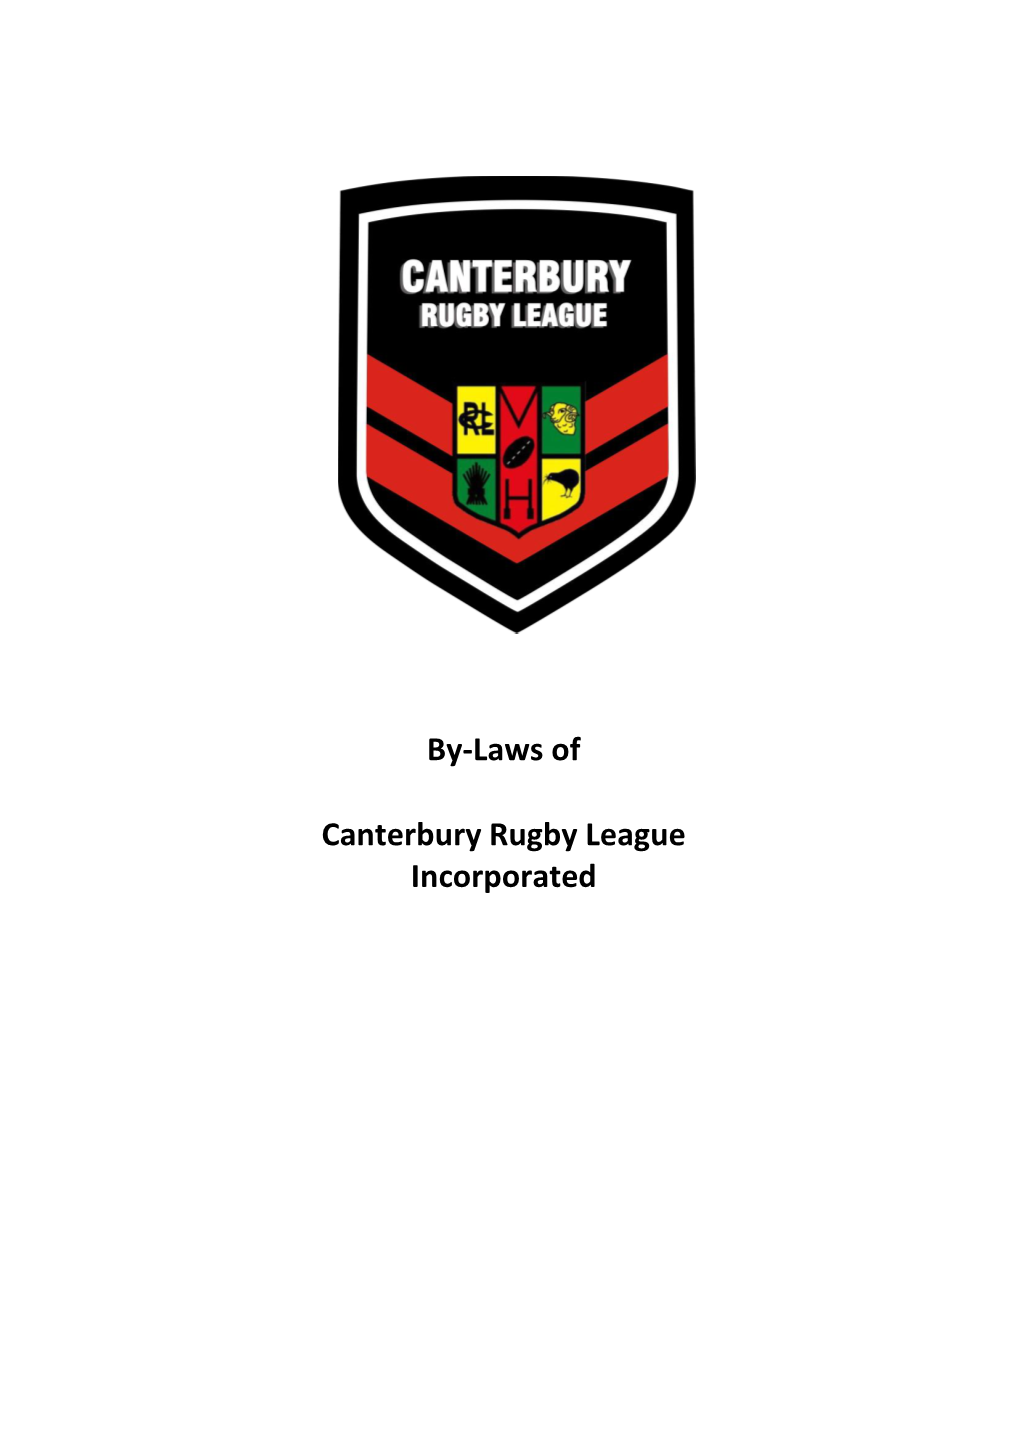 By-Laws of Canterbury Rugby League Incorporated